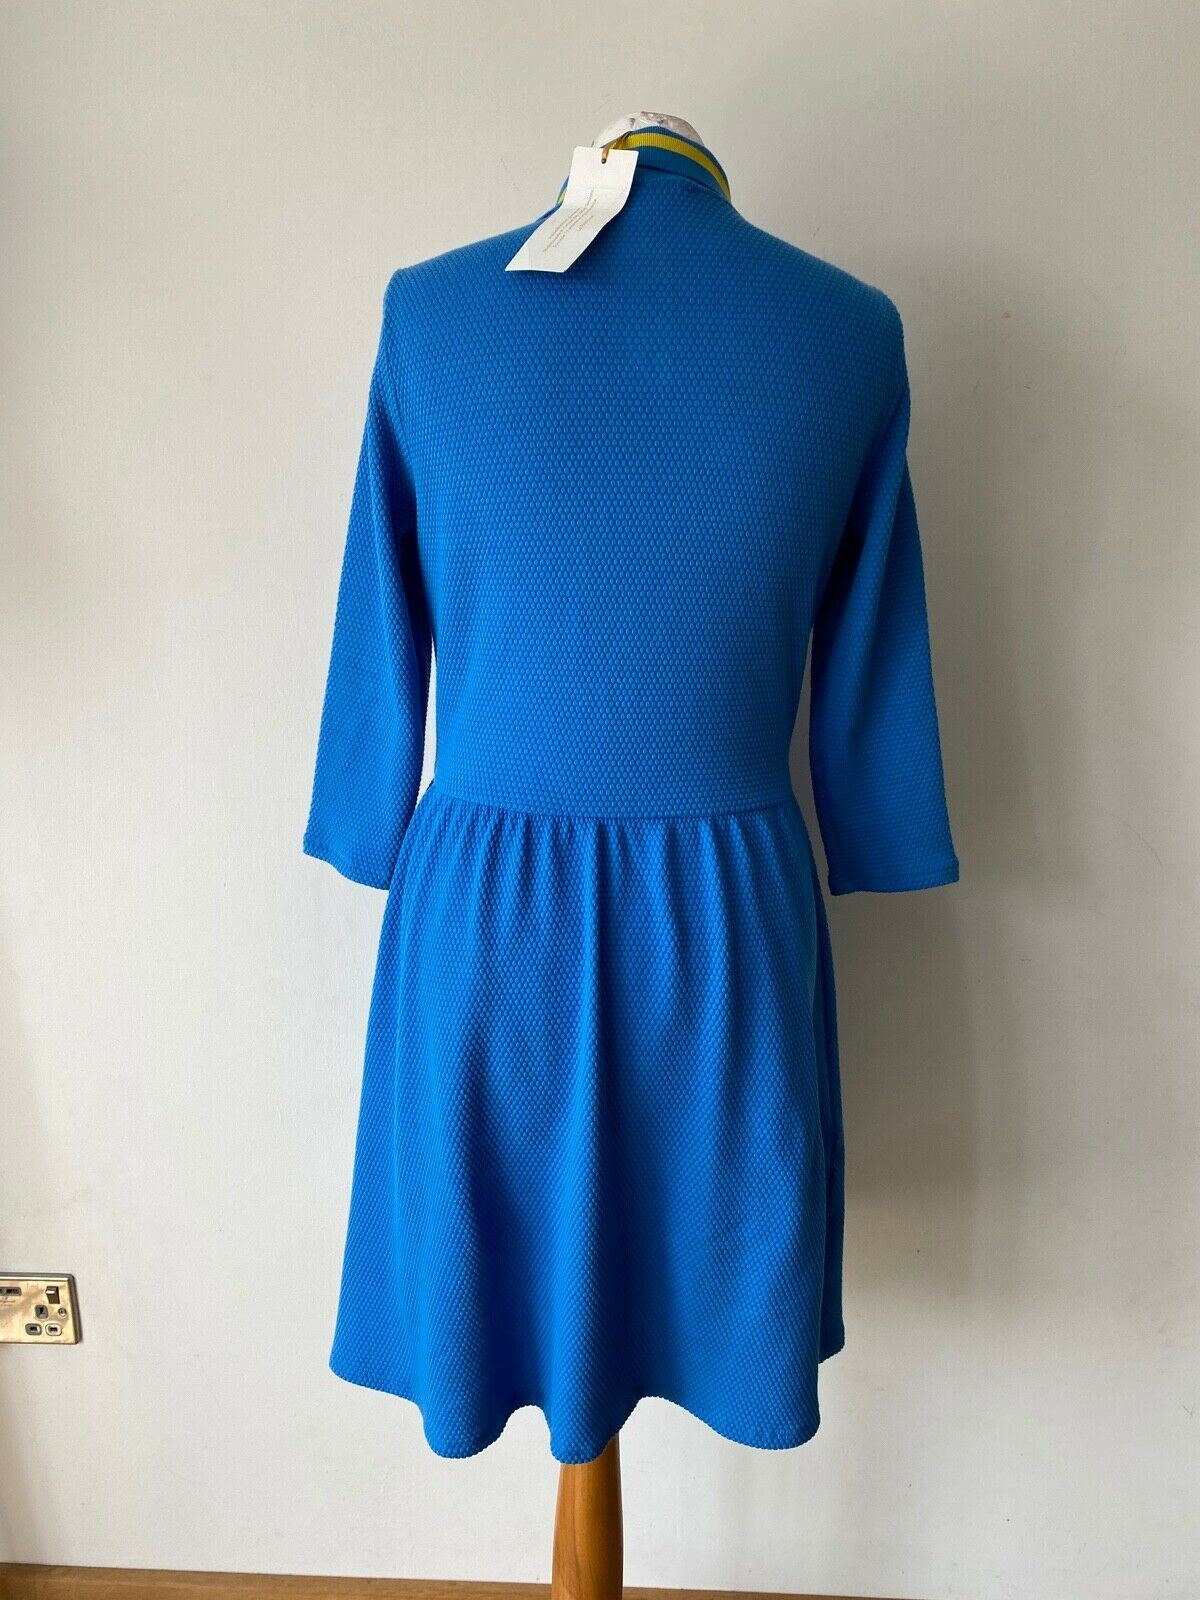 Mademoiselle R La Redoute Blue Collared Dress Size 10